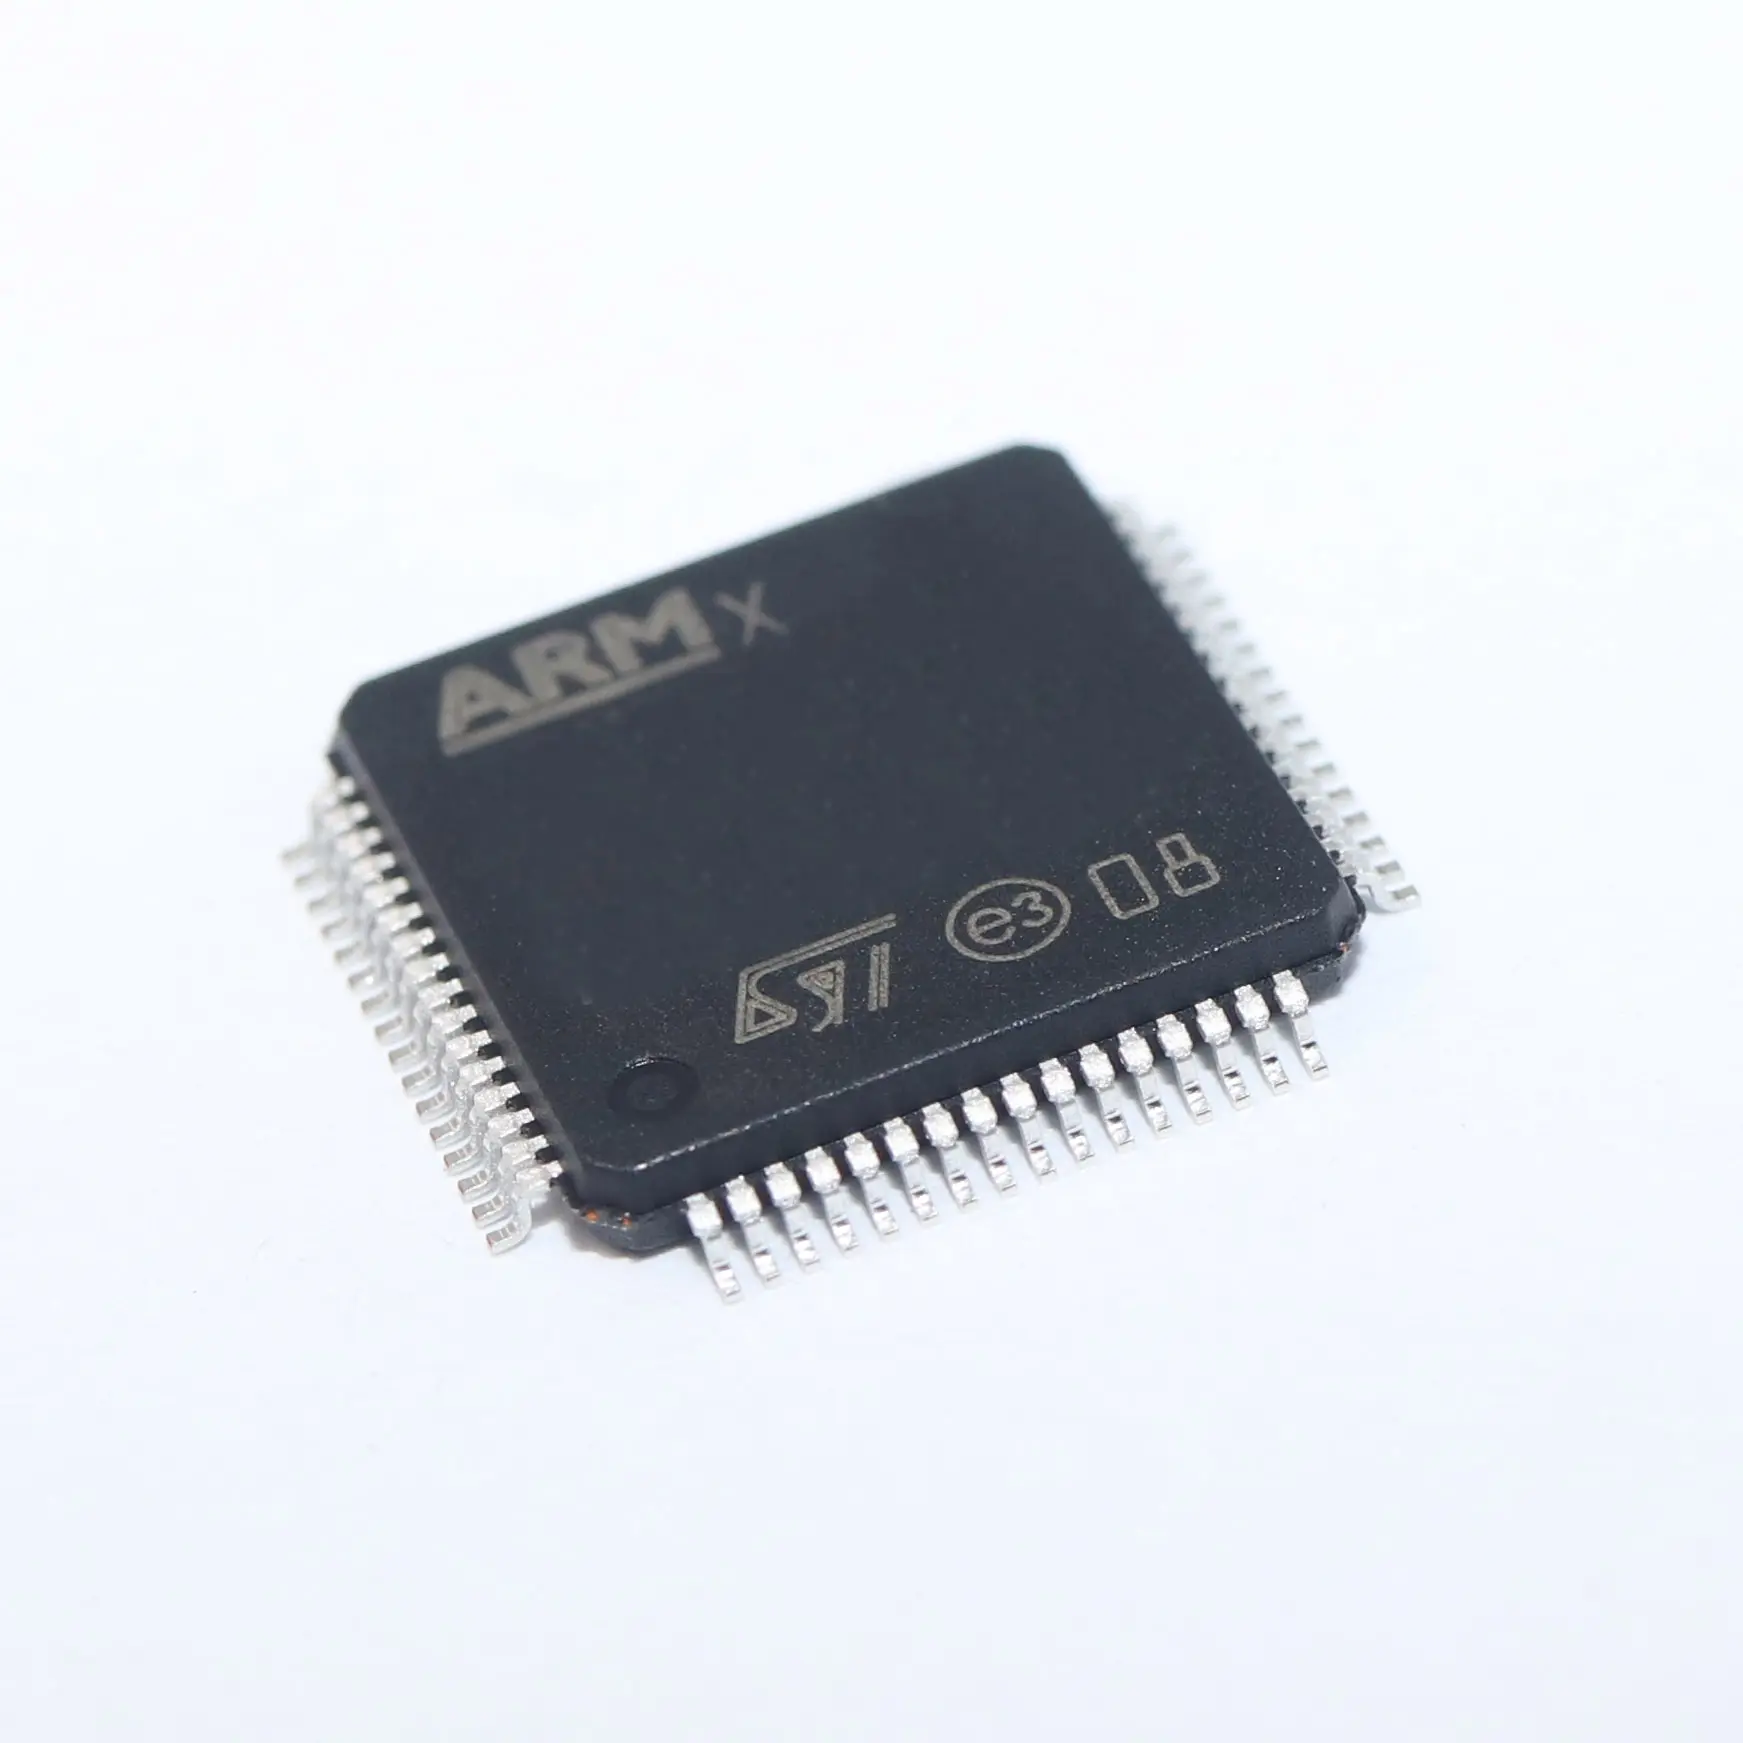 Automotive Engineers Ideal Choice Versatile Multi-Functional Top Grade Automotive-Grade Integrated Circuit (IC) Chip L9369TR